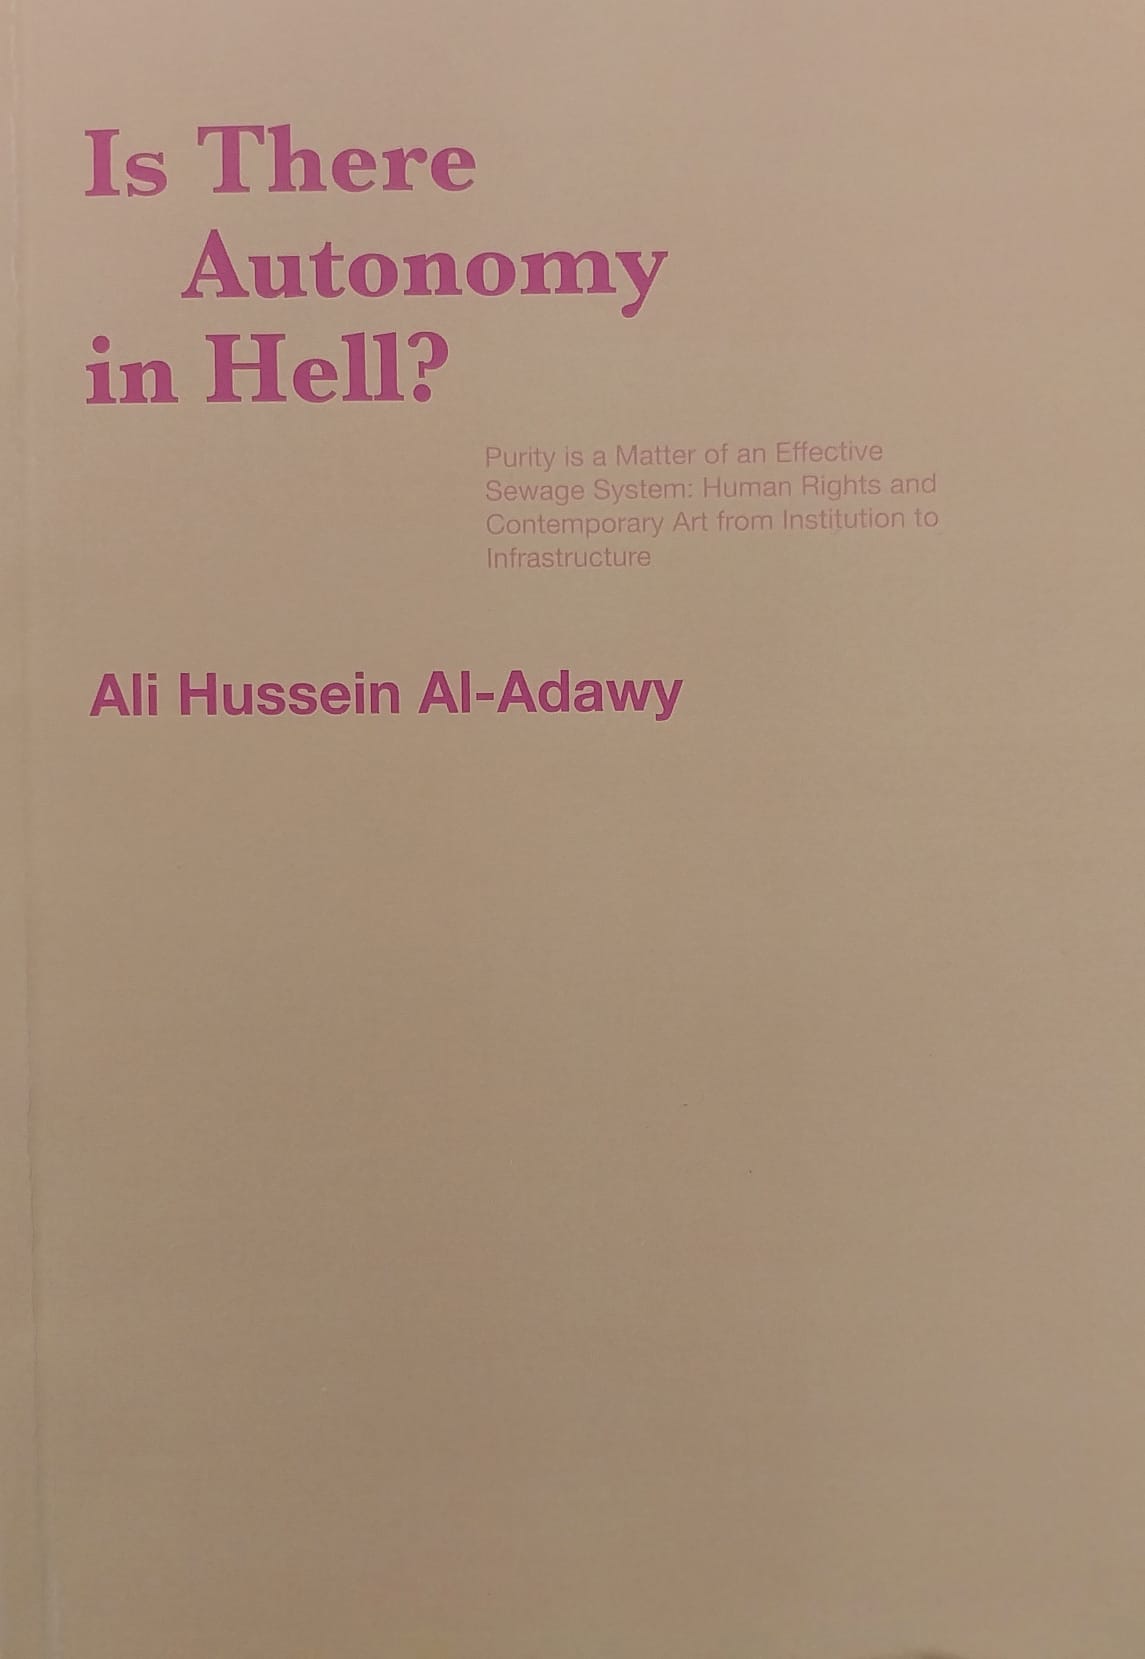 Is there Autonomy in Hell?